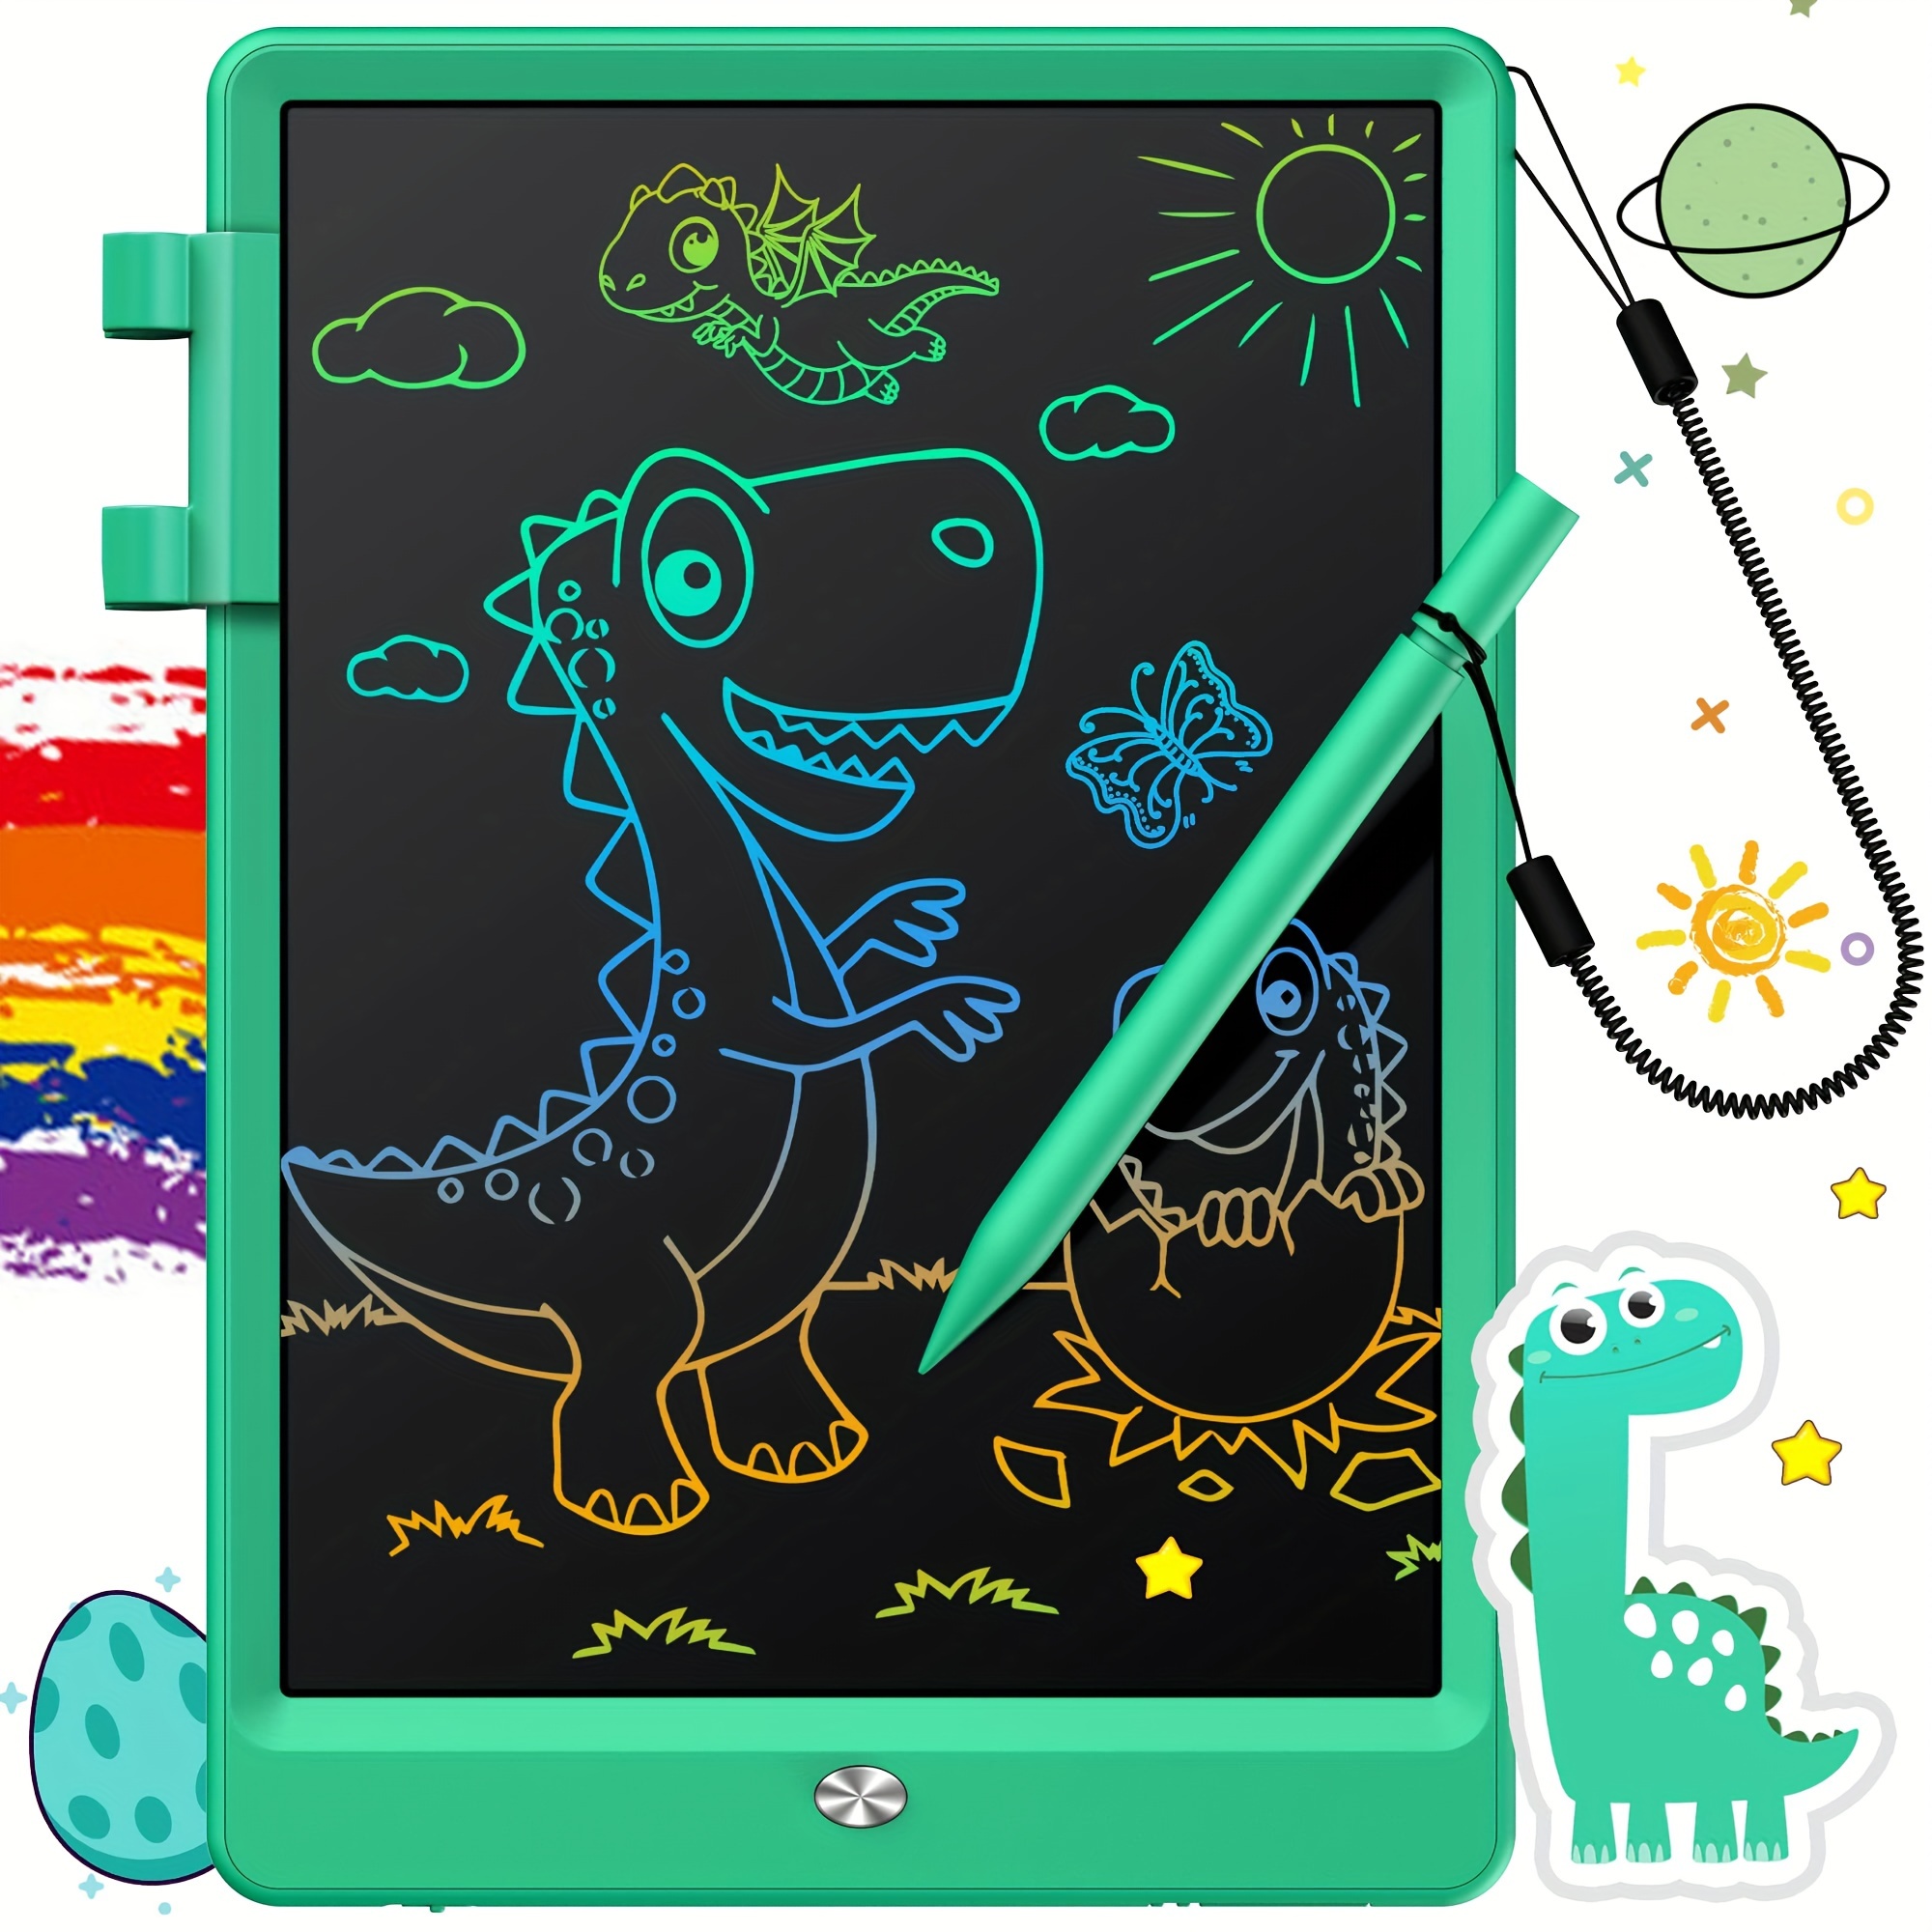 

10 Inch Lcd Writing Board For Children 3-8 Years Old - Electronic Drawing Board And Graffiti Board As Educational Birthday Gifts For Girls And Boys